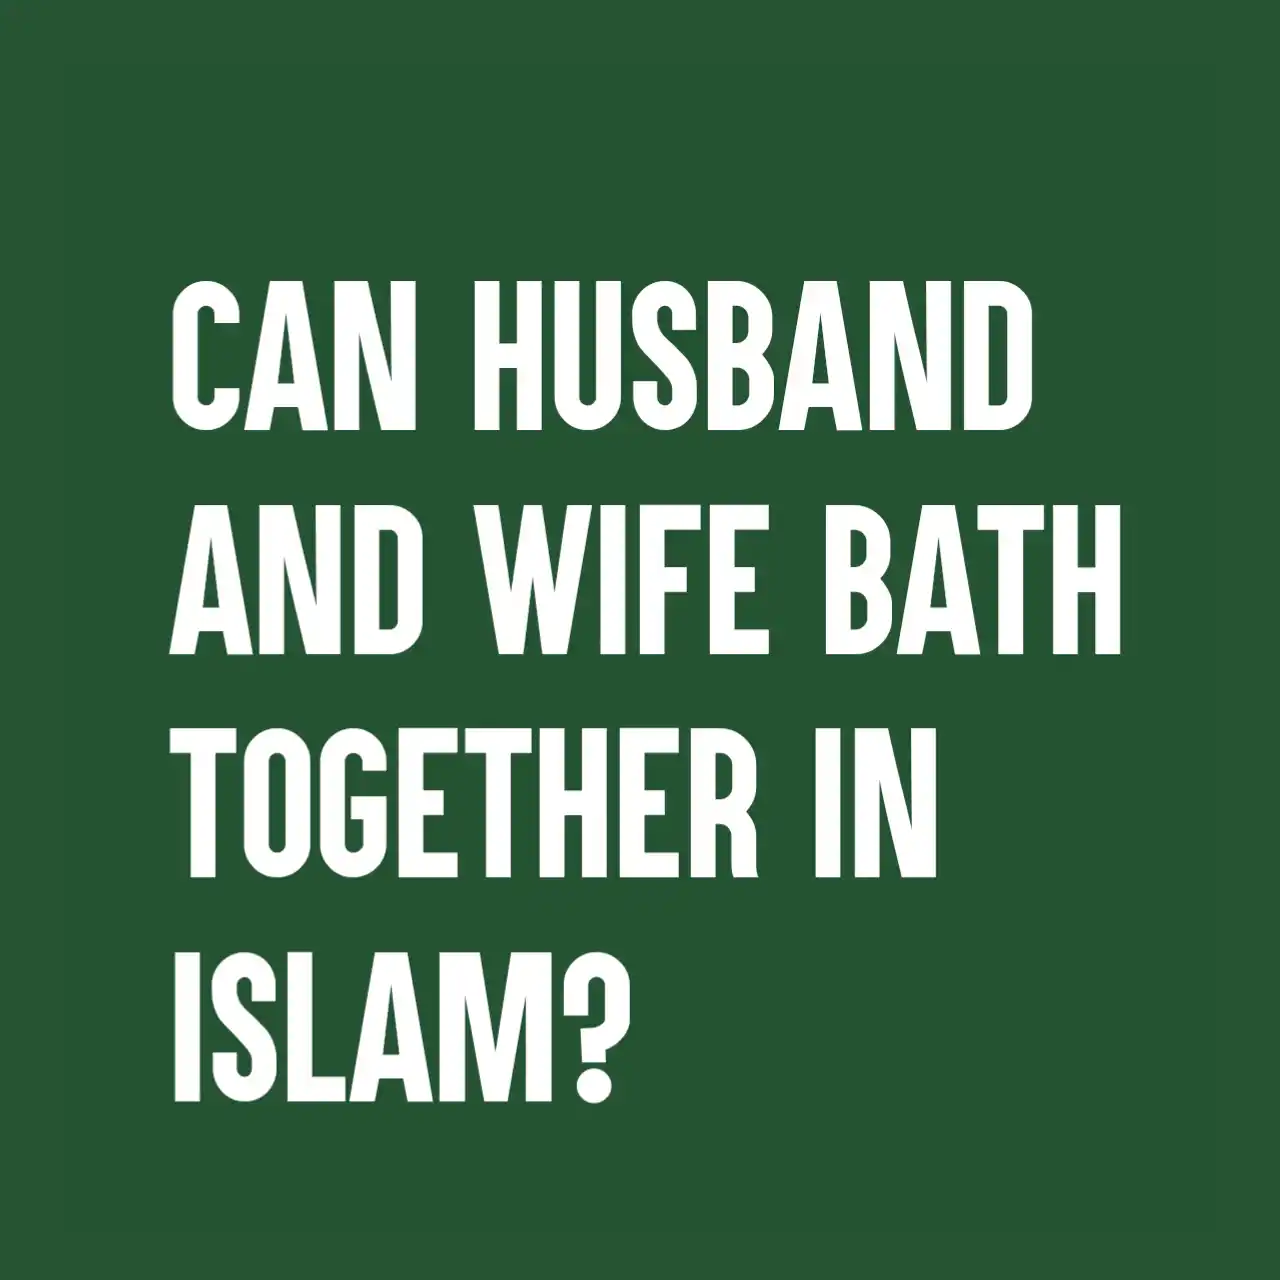 Can Husband And Wife Bath Together in Islam?